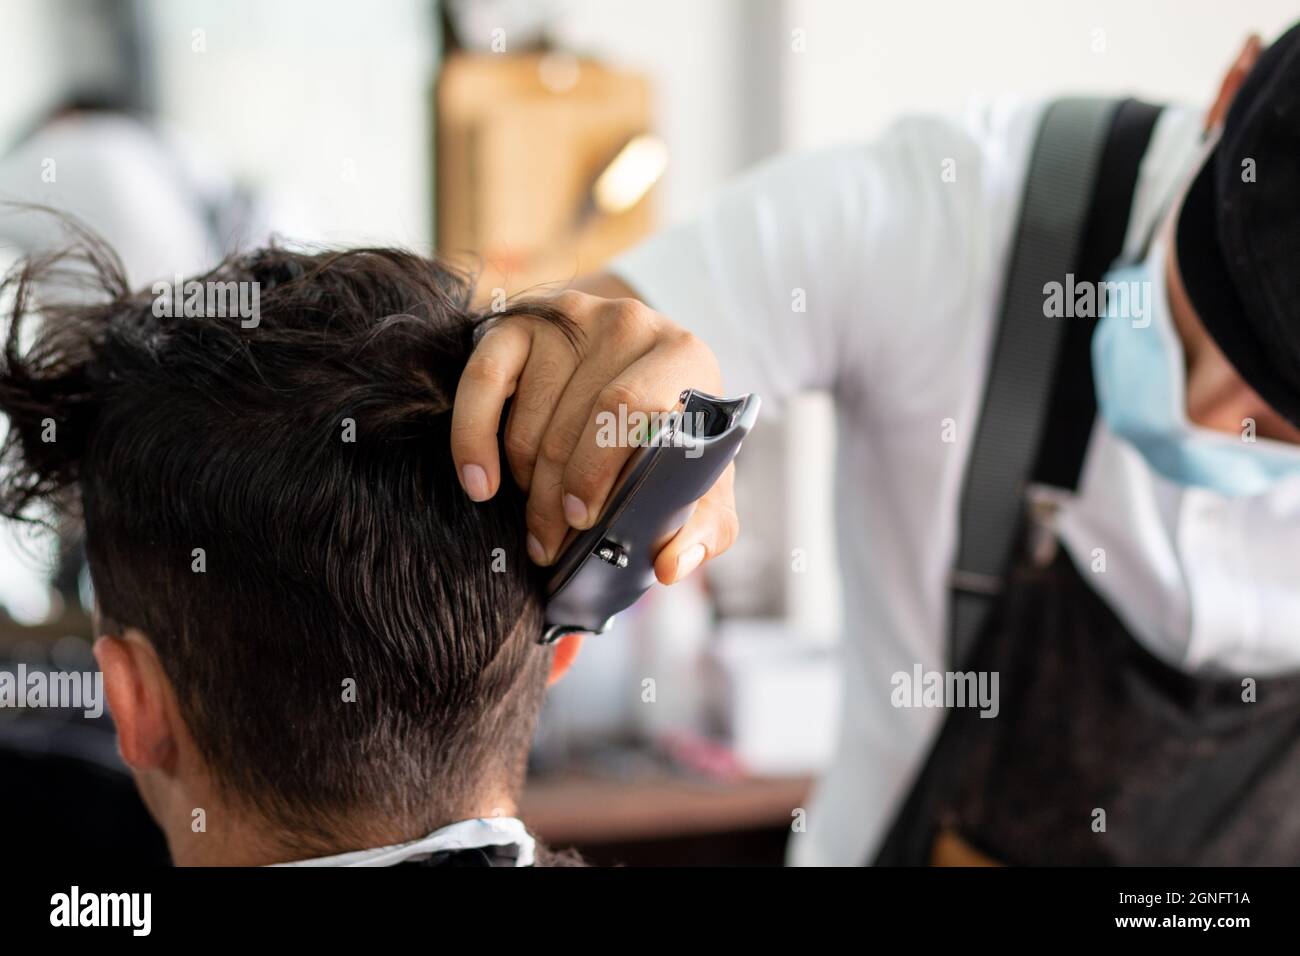 Barber with face mask using hair clipper on client. Stylist cutting hair Stock Photo